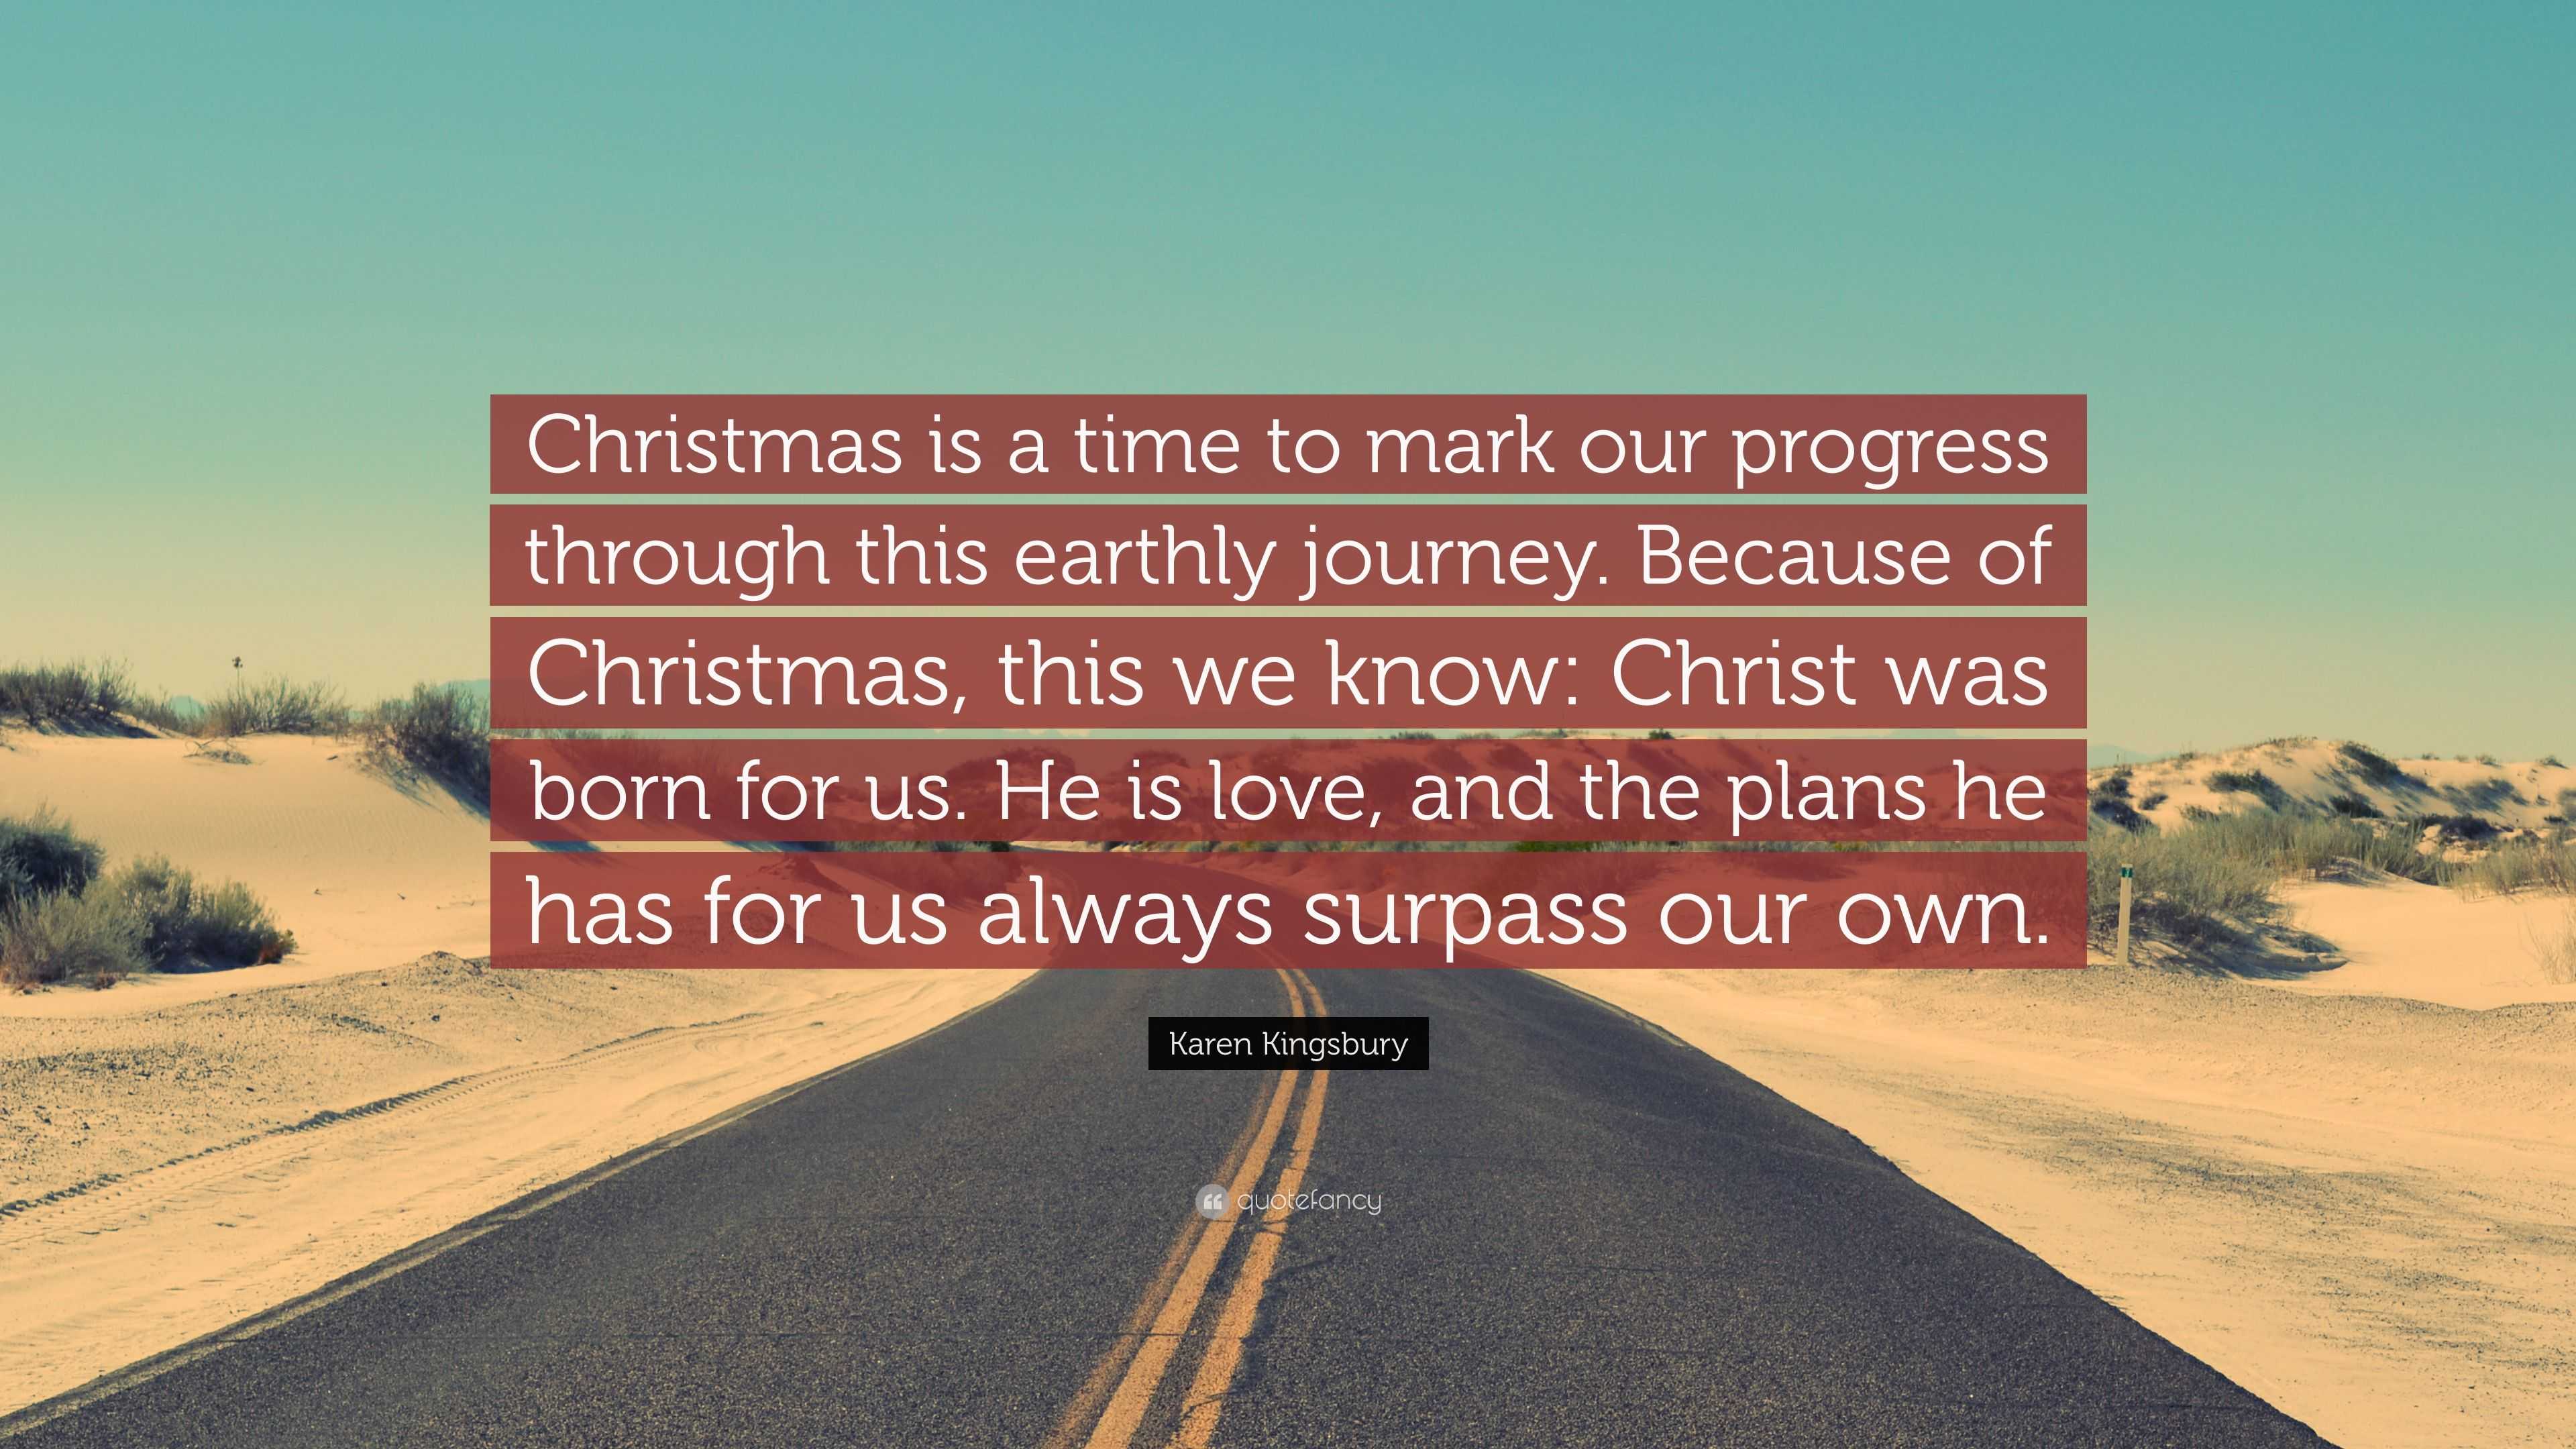 Karen Kingsbury Quote “Christmas is a time to mark our progress through this earthly